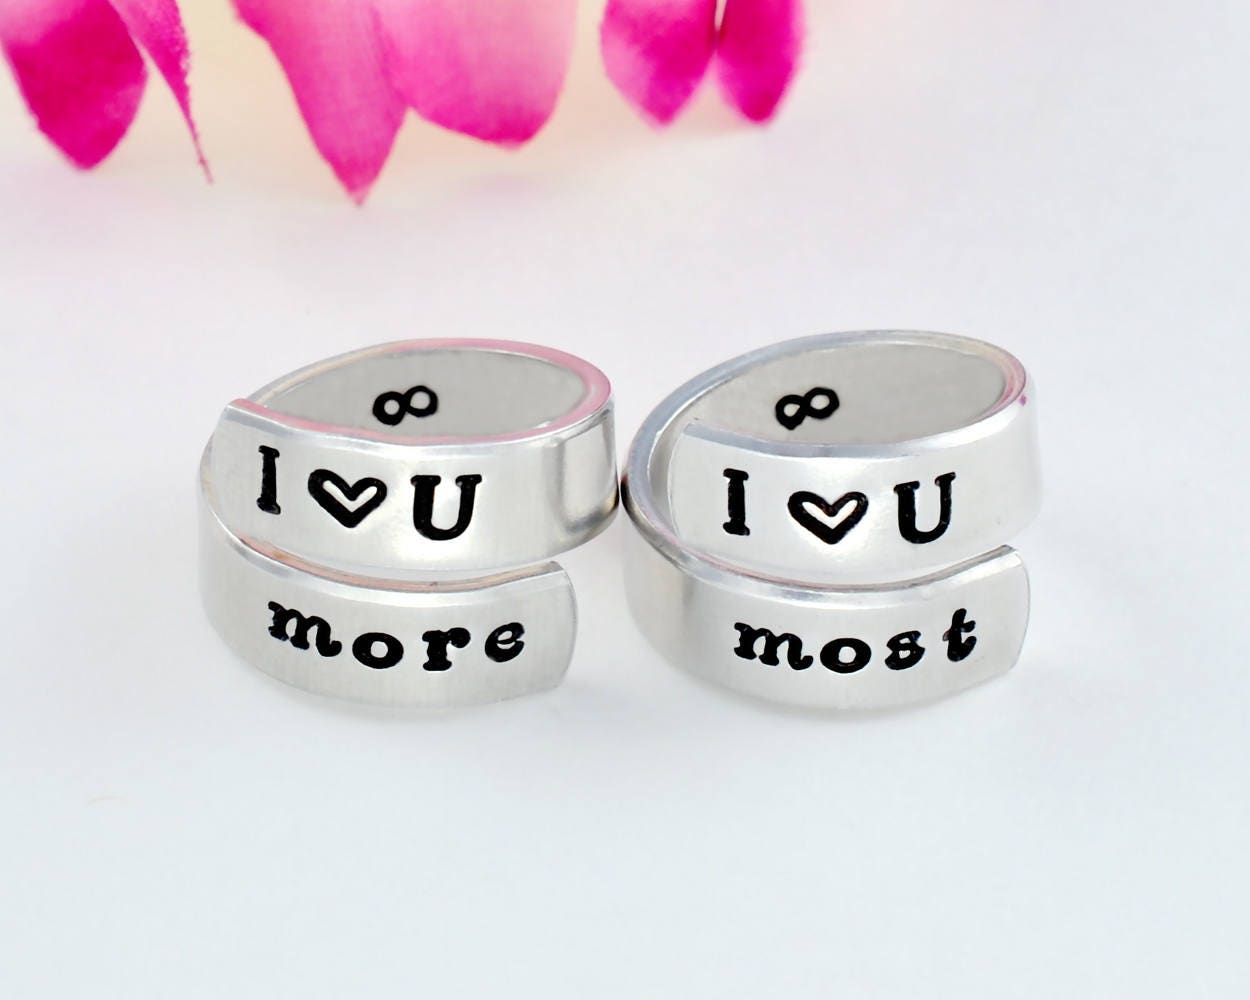 i love you more on ring｜TikTok Search